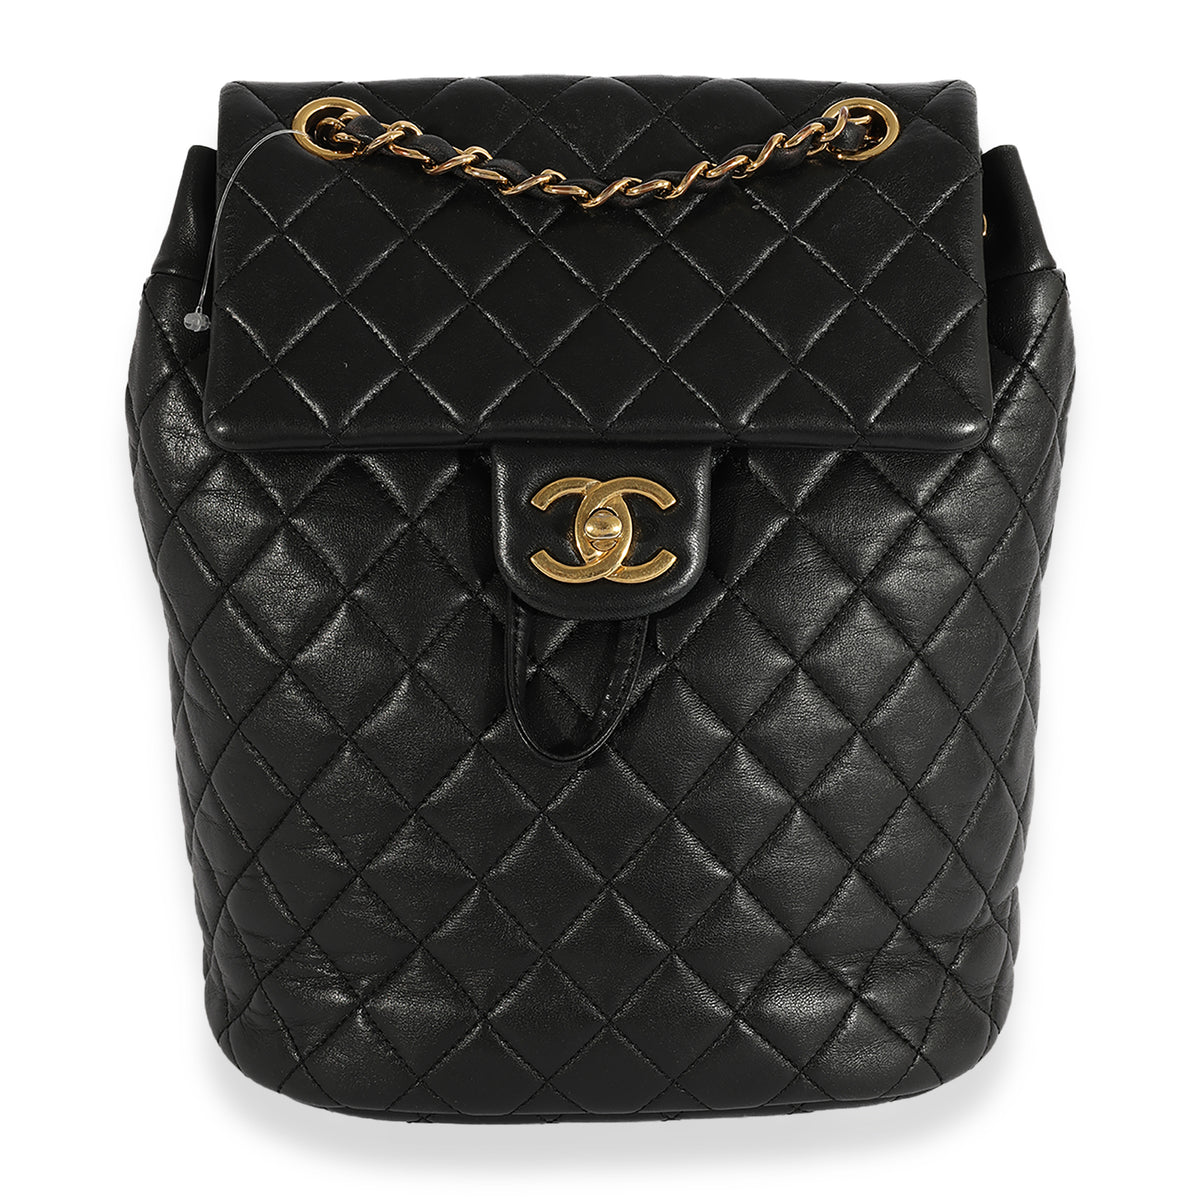 Chanel Black Quilted Lambskin Small Urban Spirit Backpack, myGemma